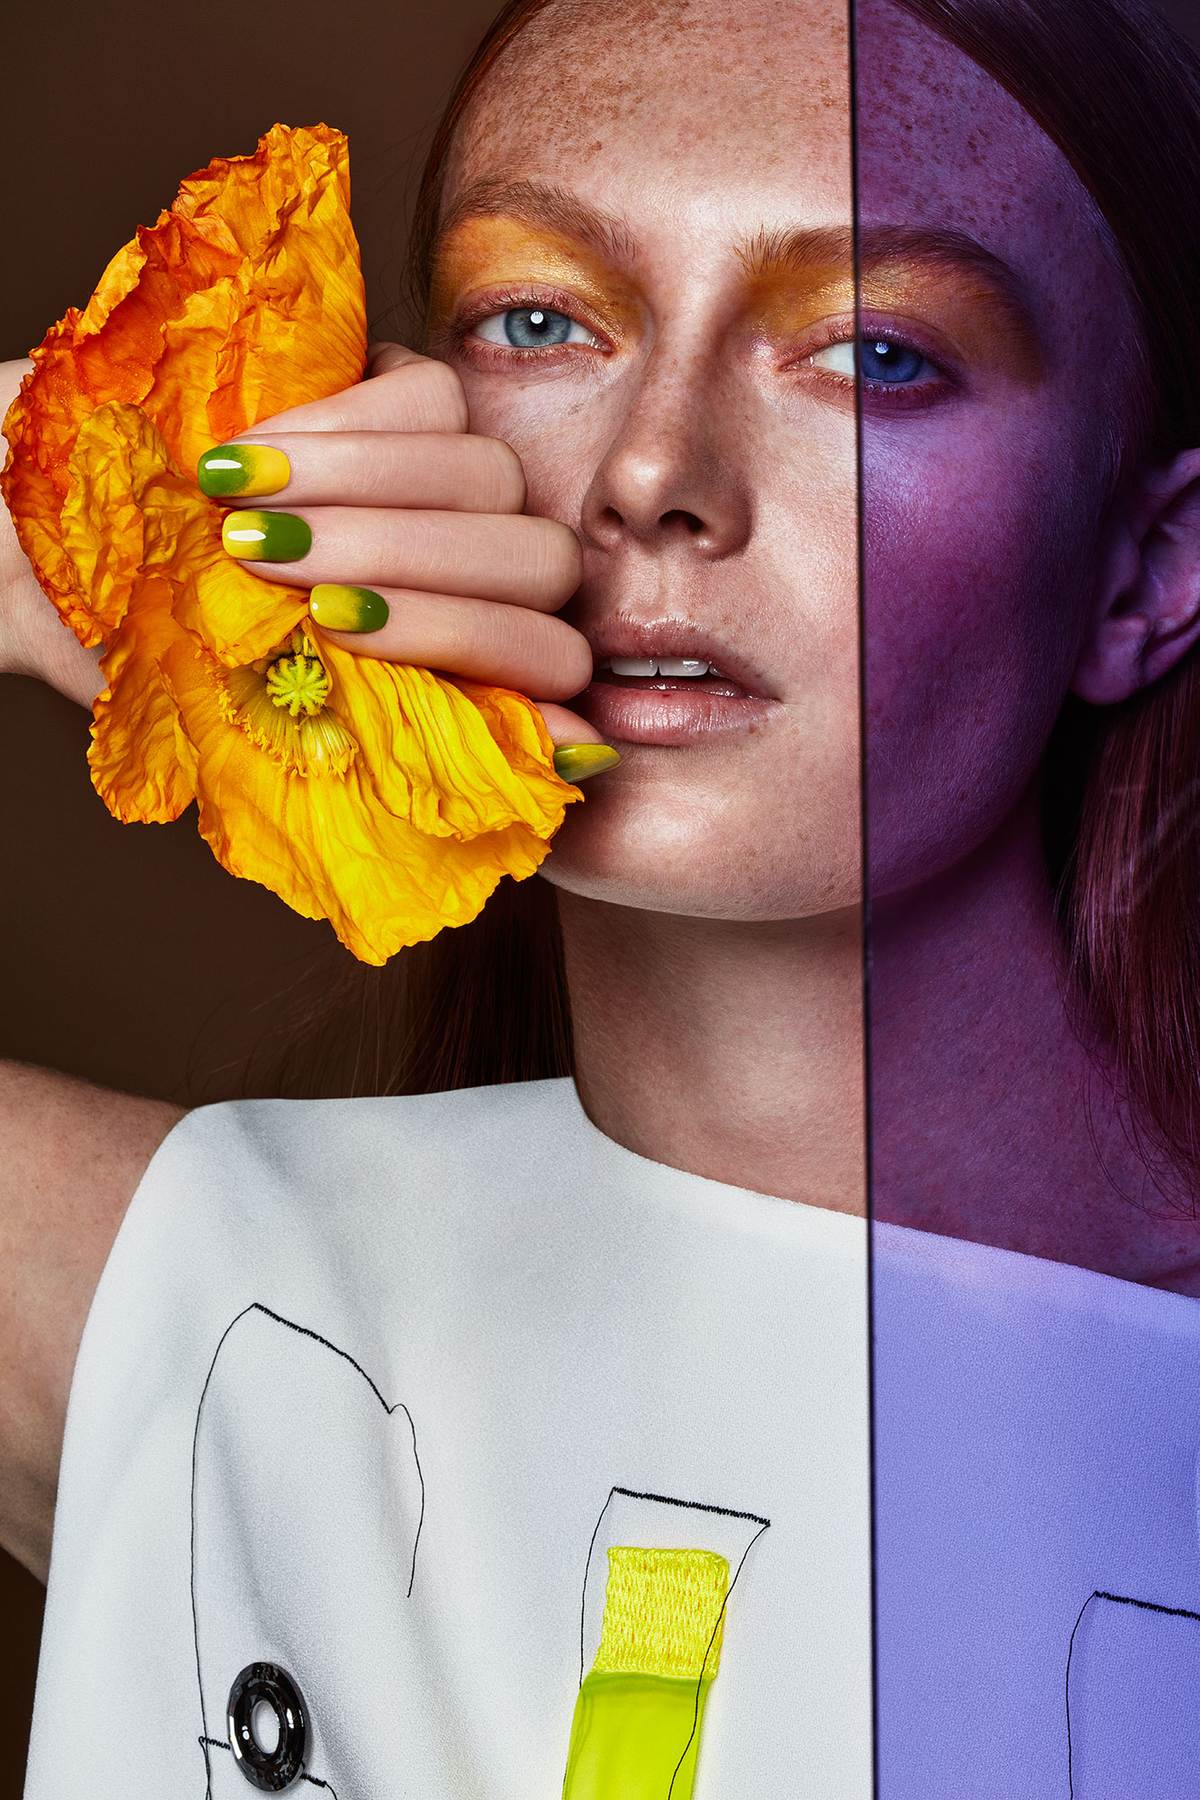 BEAUTY IMAGE WITH YELLOW/ORANGE POPPY IN THE HAND OF THE MODEL